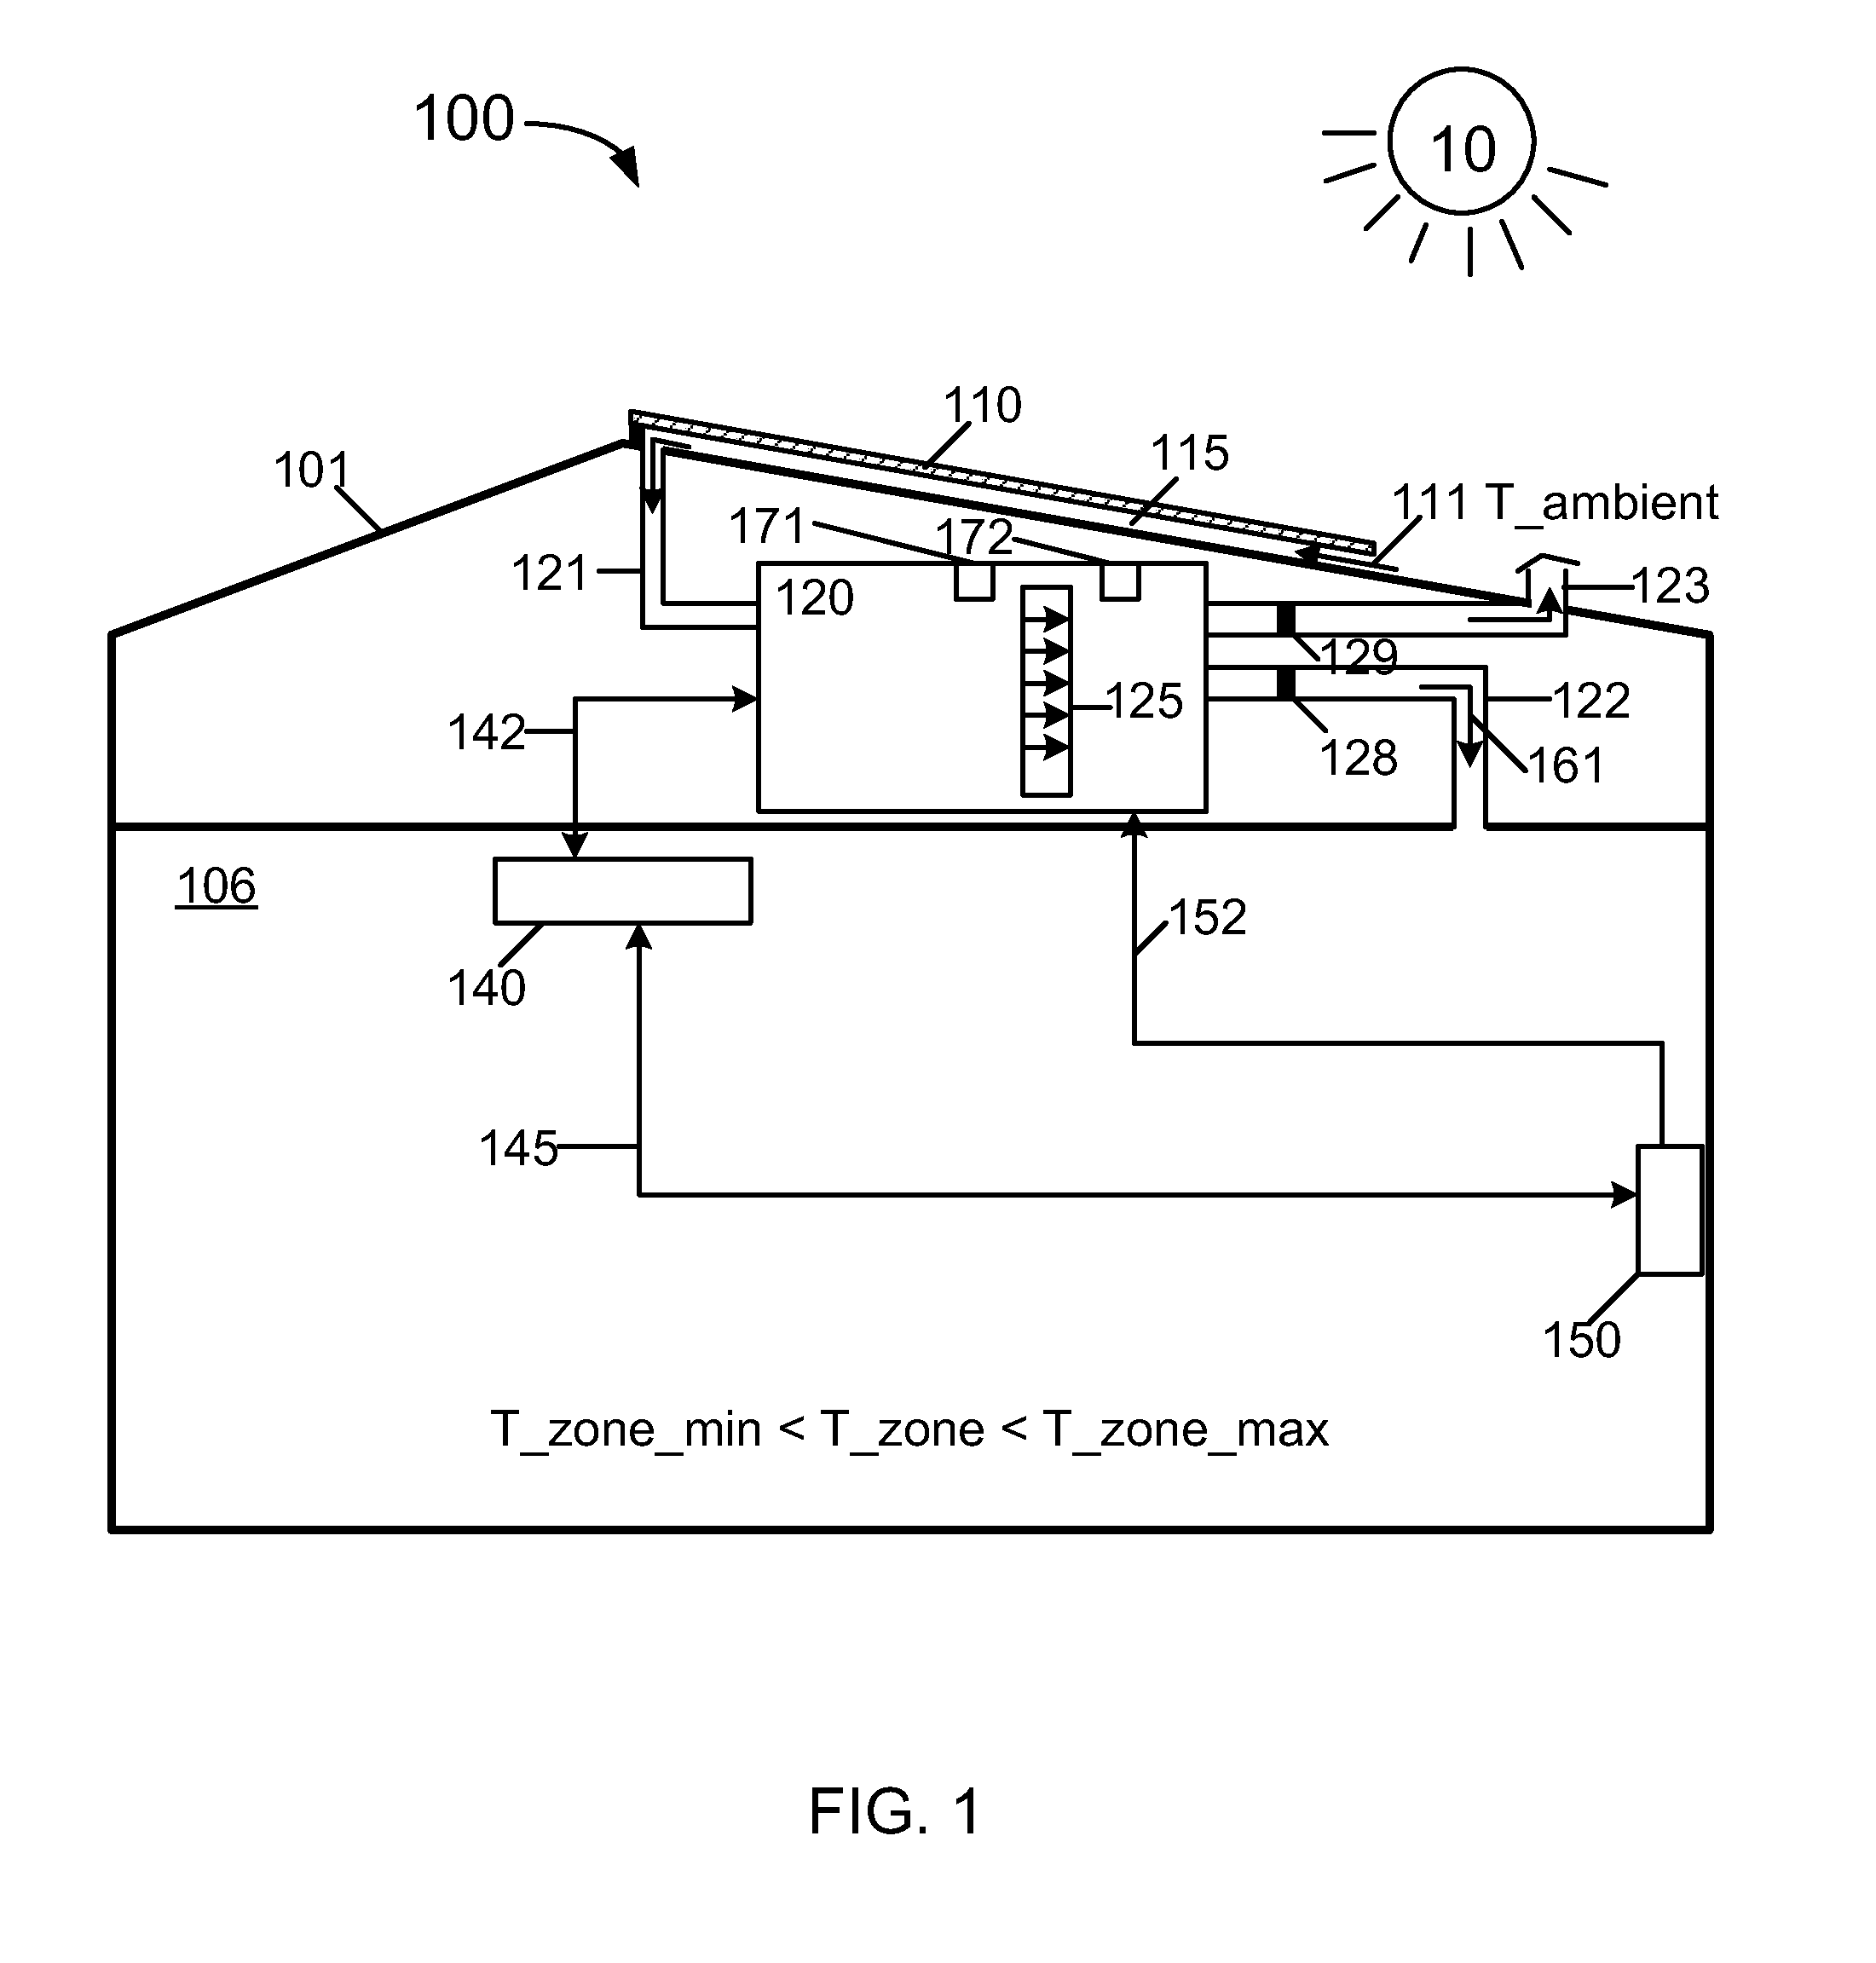 Method and system of ventilation for a healthy home configured for efficient energy usage and conservation of energy resources